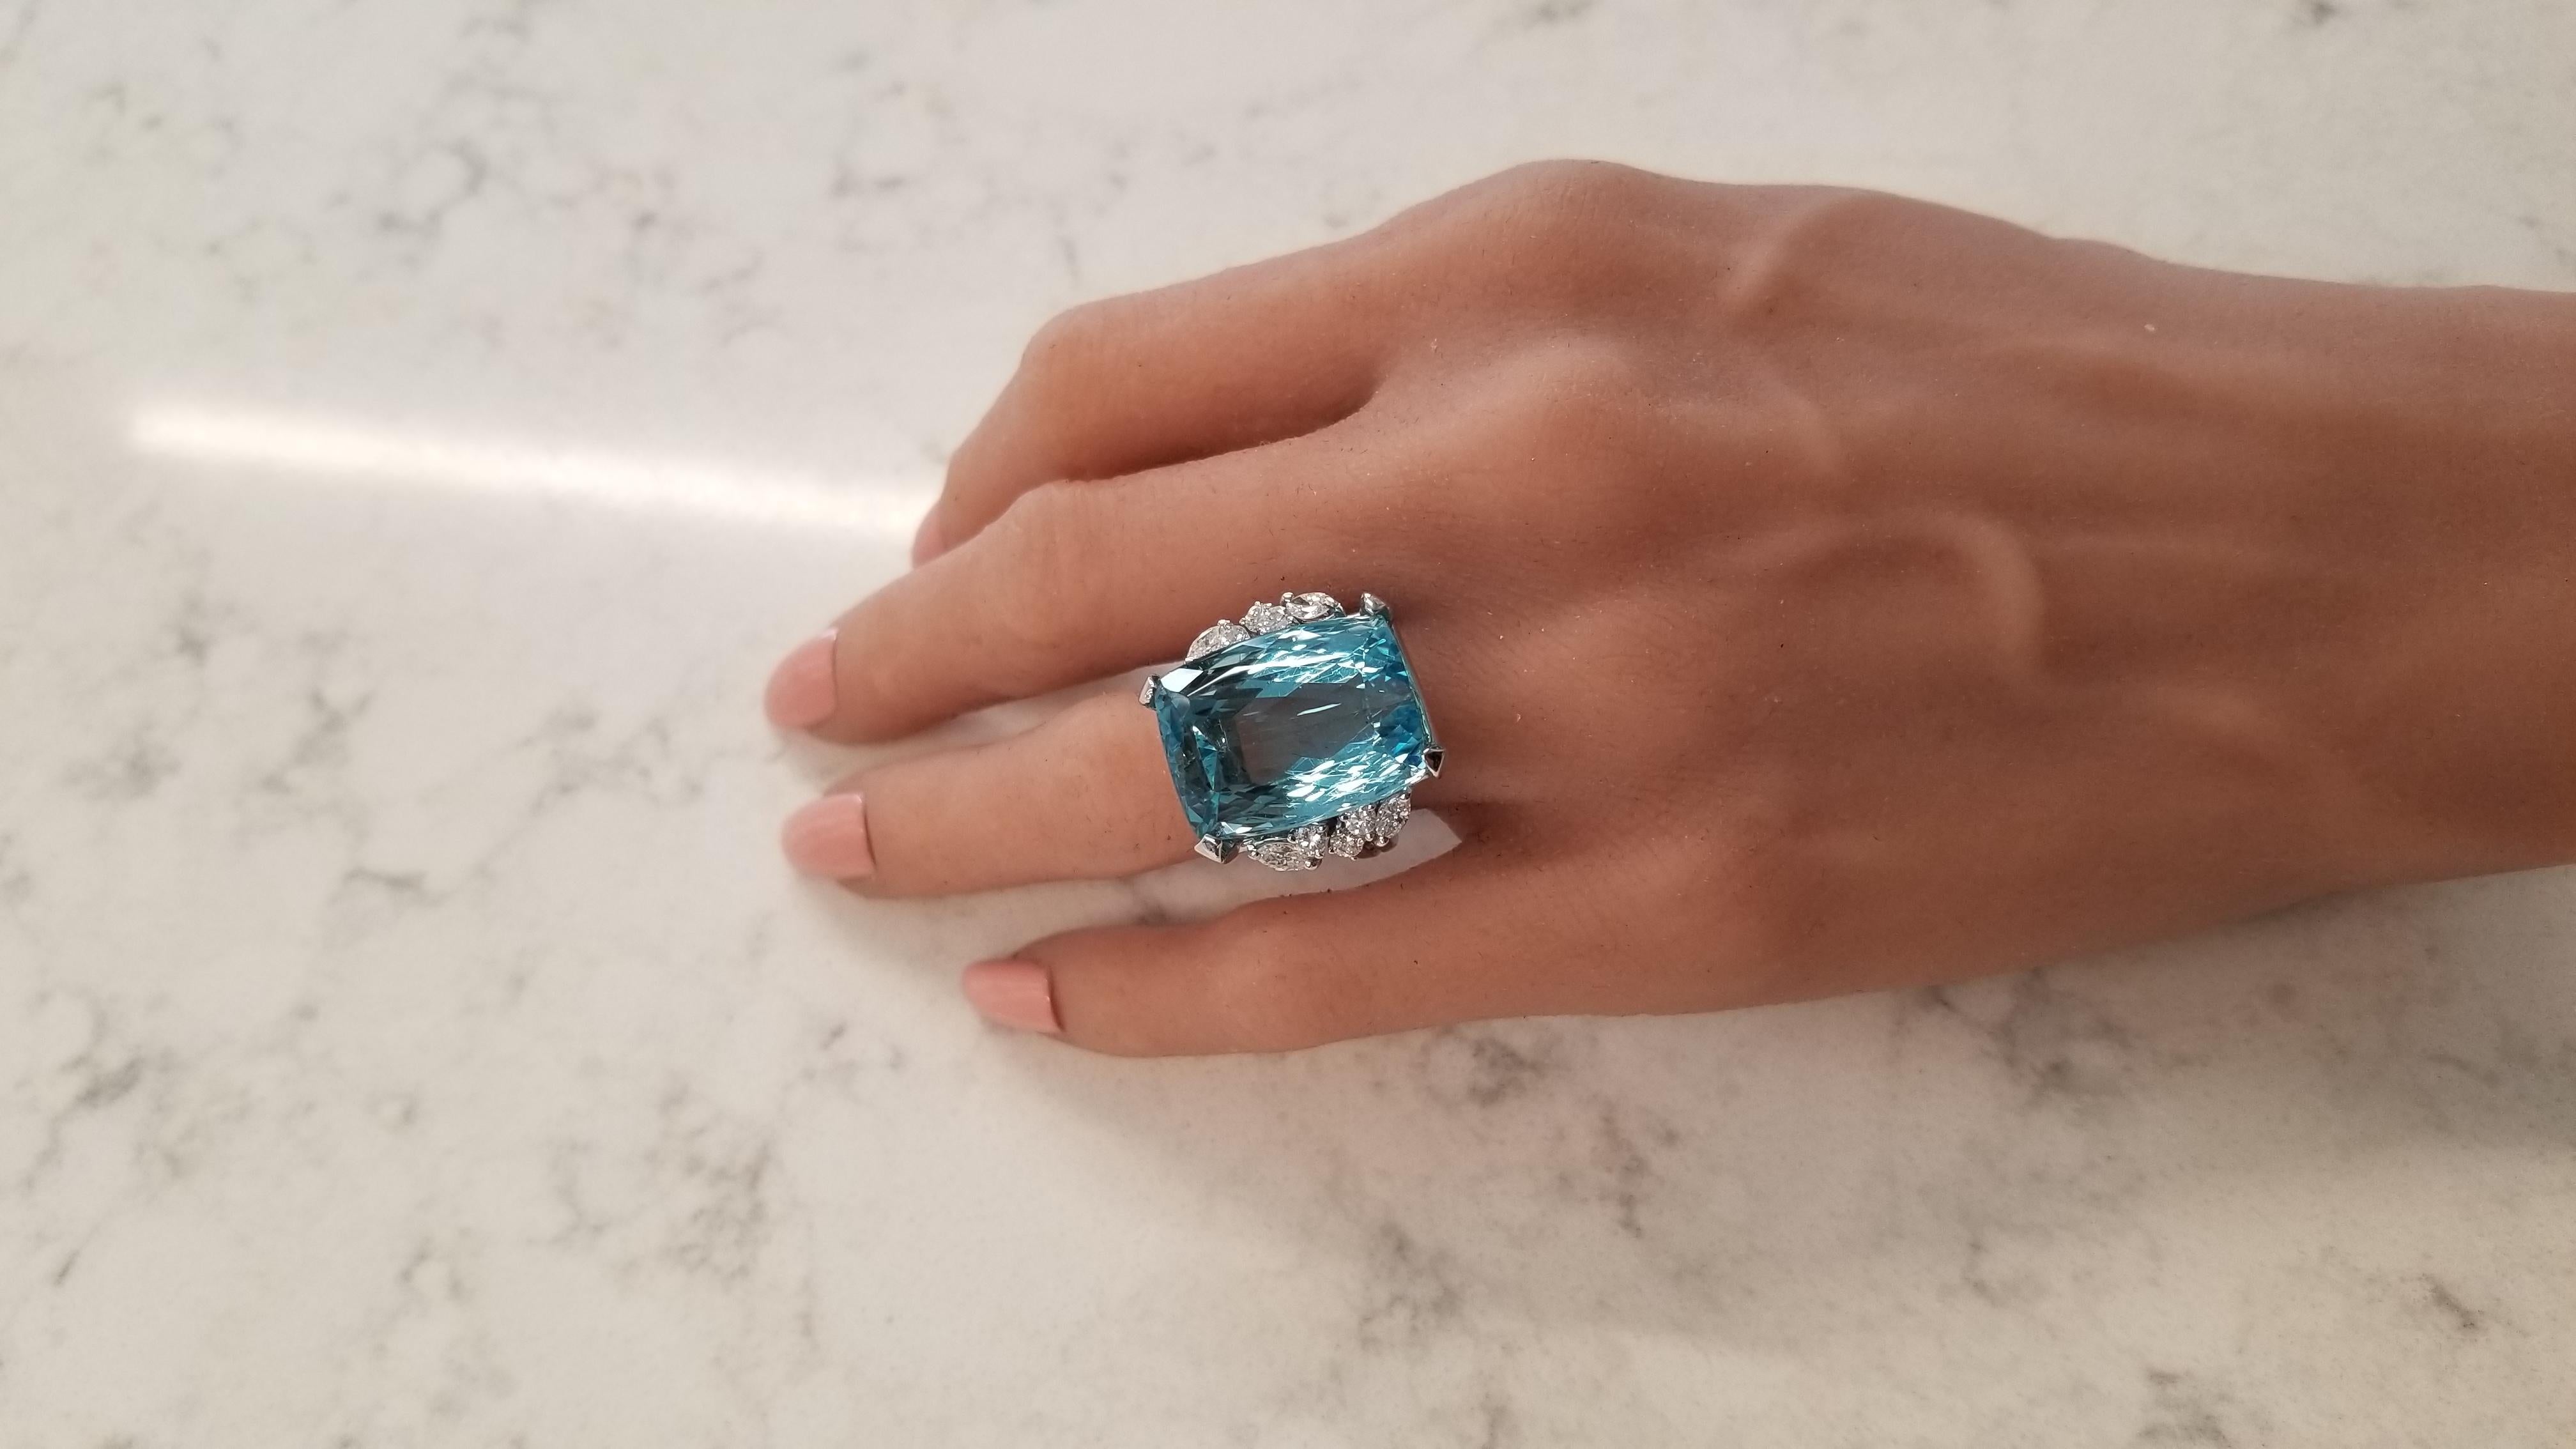 This is a significant cocktail ring that features a clear, crisp emerald cut aquamarine weighing 30.63 carats and measures 20.44 x 15.45mm and exhibits the color of sky blue or glacial water. The gem source is Brazil; its transparency and clarity